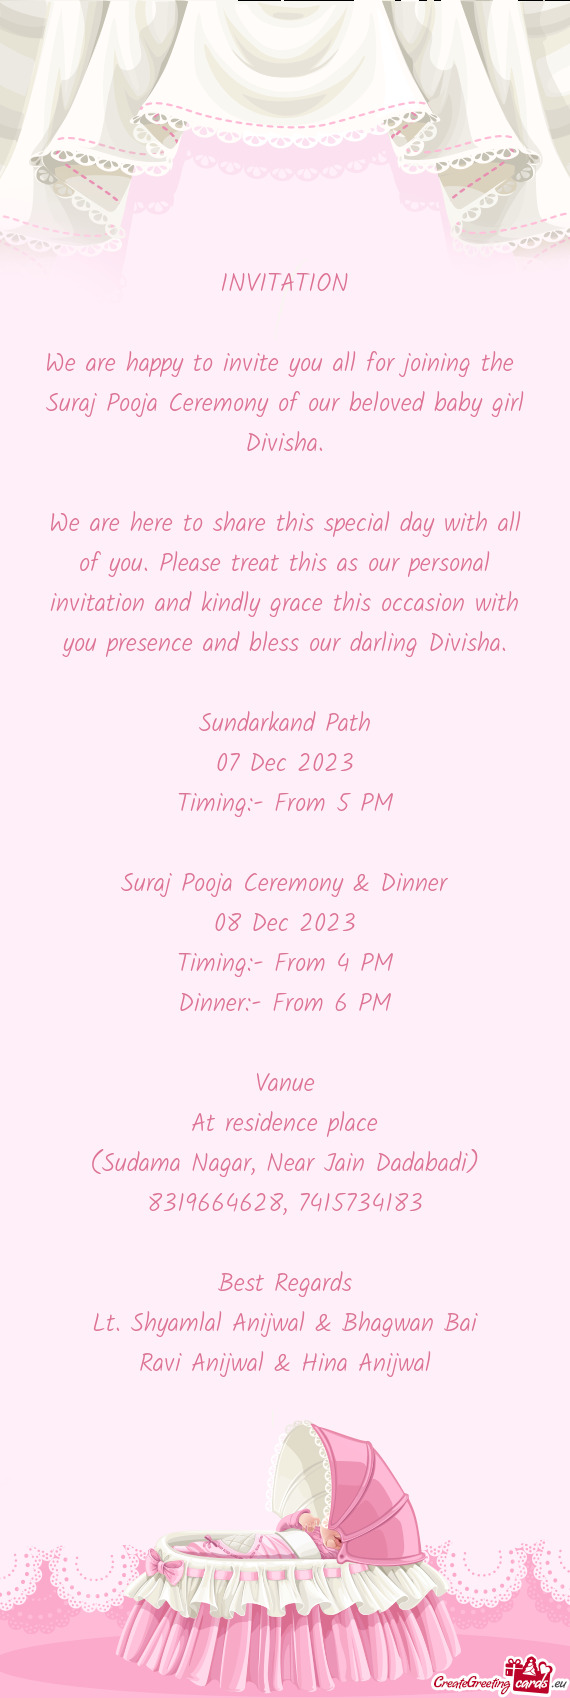 We are happy to invite you all for joining the Suraj Pooja Ceremony of our beloved baby girl Divish